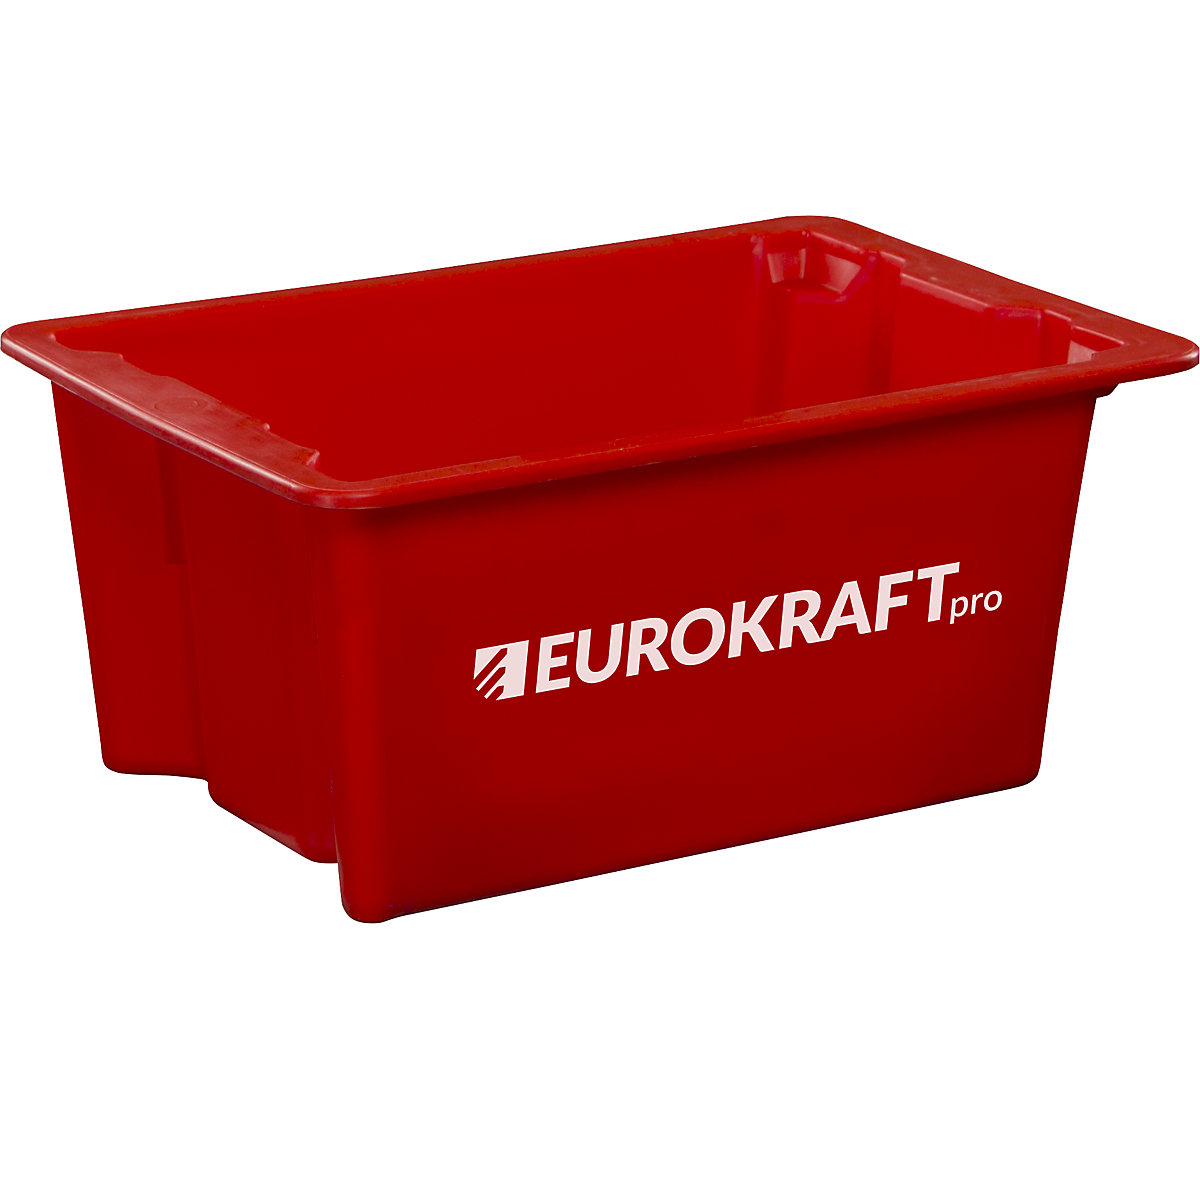 Stack/nest container made of polypropylene suitable for foodstuffs – eurokraft pro, 6 l capacity, pack of 4, solid walls and base, red